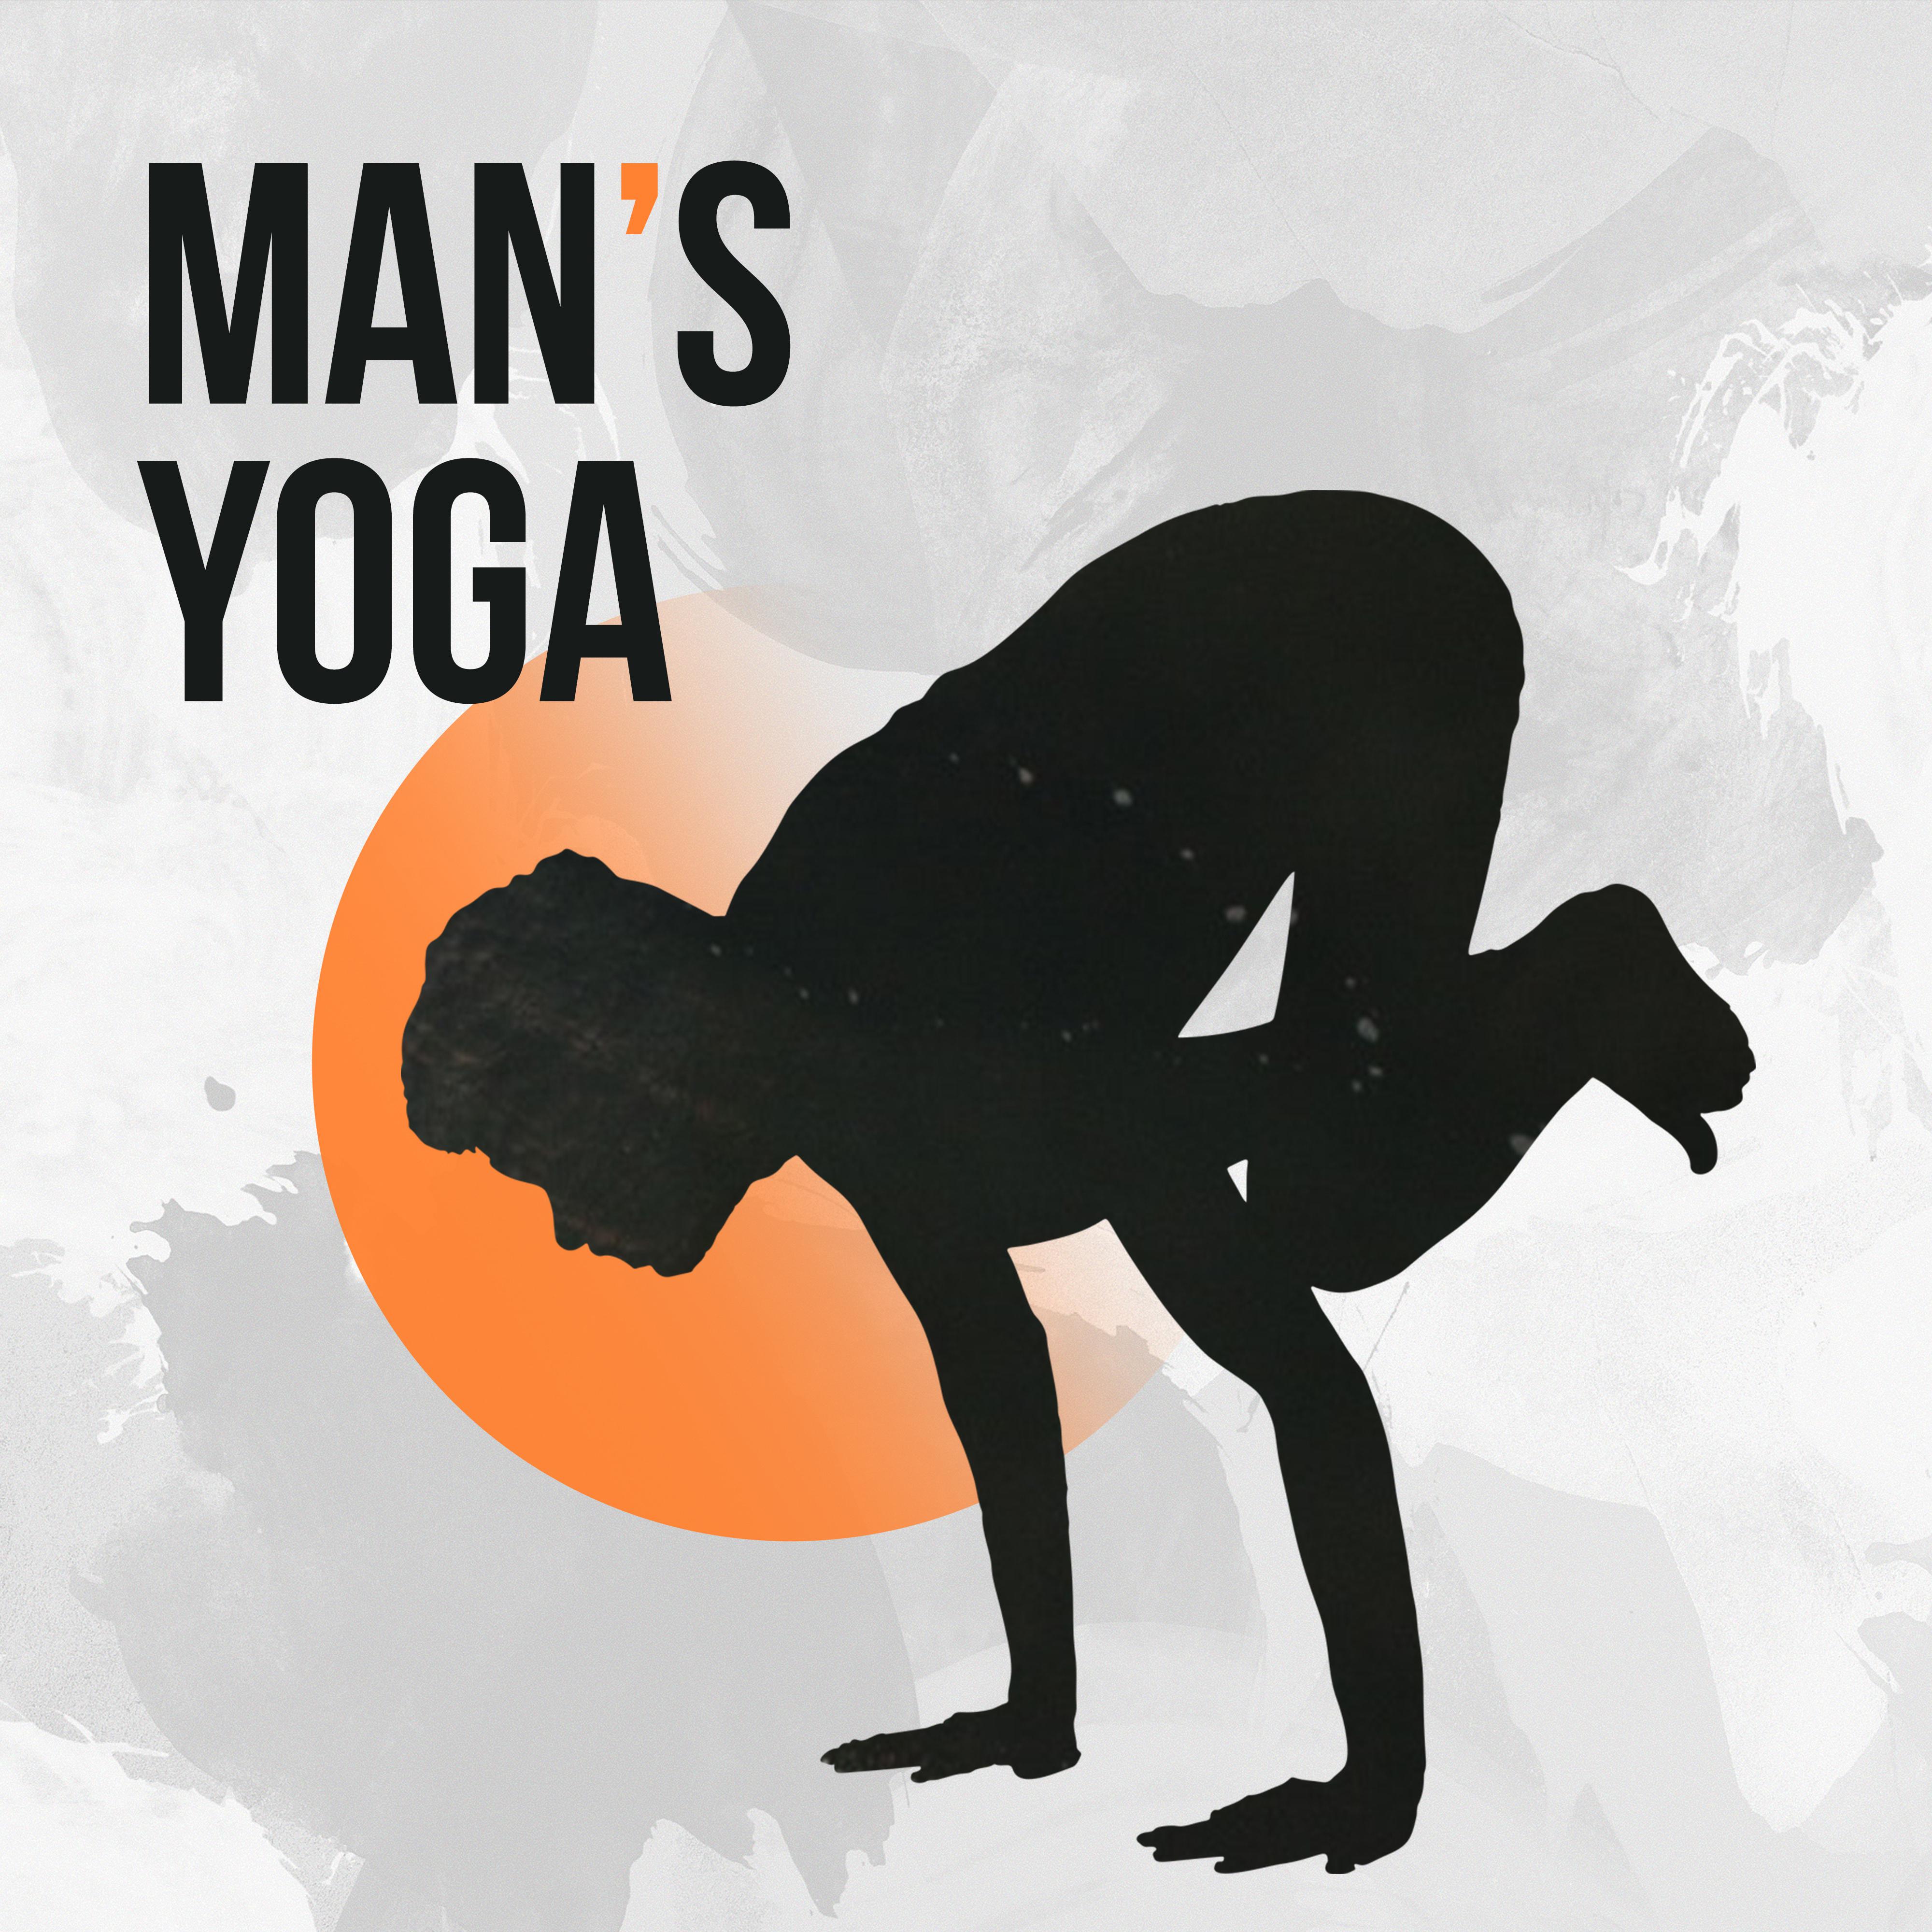 Men' s Yoga: Music for Men to Exercise and Practice Yoga